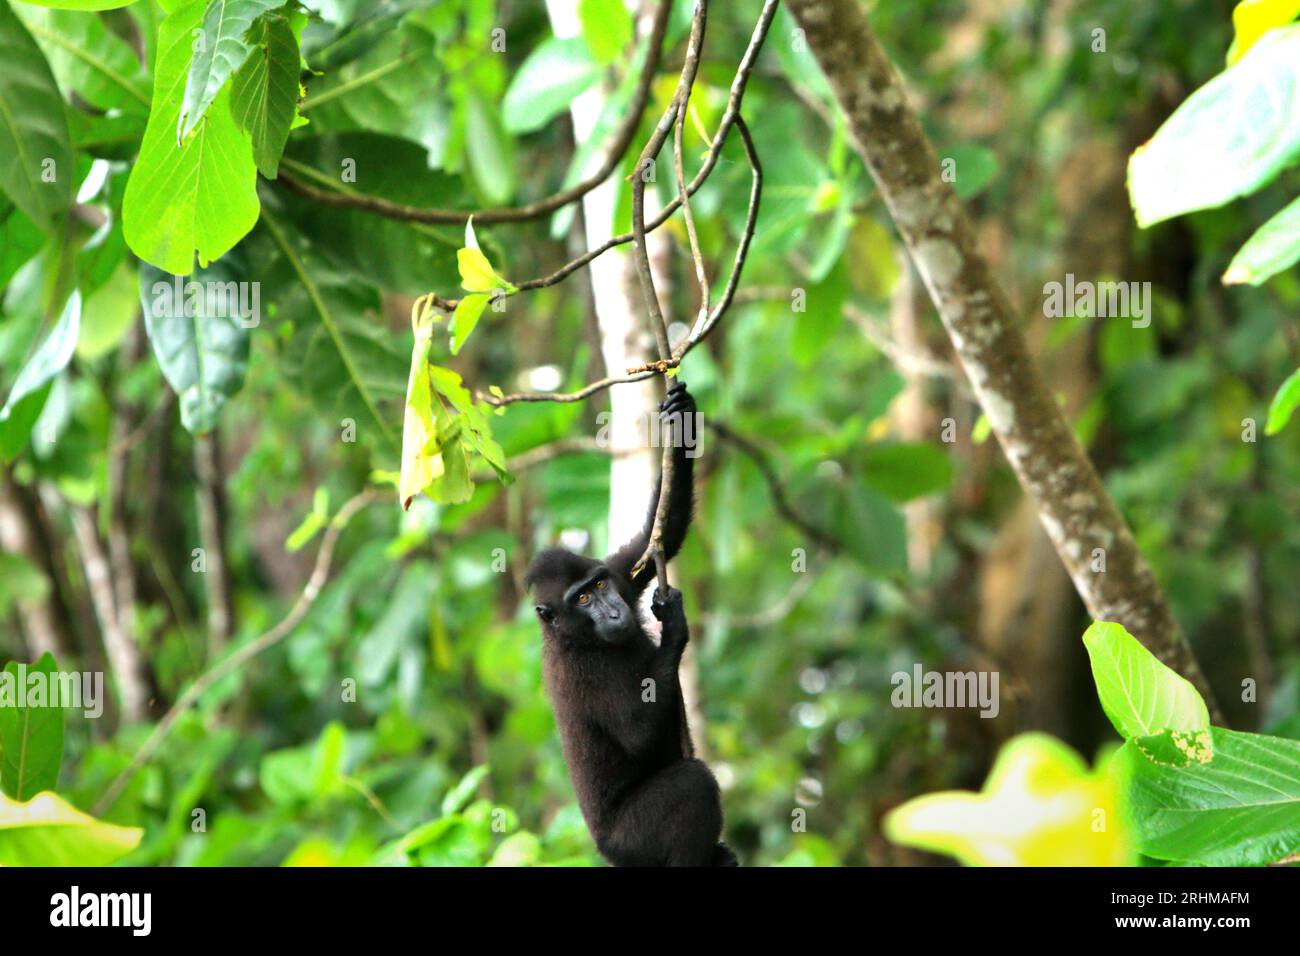 A crested macaque (Macaca nigra) is hanging on a twig in Tangkoko forest, North Sulawesi, Indonesia. A recent report by a team of scientists led by Marine Joly revealed that temperature is increasing in Tangkoko forest, and the overall fruit abundance decreased. 'Between 2012 and 2020, temperatures increased by up to 0.2 degree Celsius per year in the forest, and the overall fruit abundance decreased by 1 percent per year,” they wrote on International Journal of Primatology in July 2023. 'In a warmer future, they (primates) would have to adjust, resting and staying in the shade during the... Stock Photo